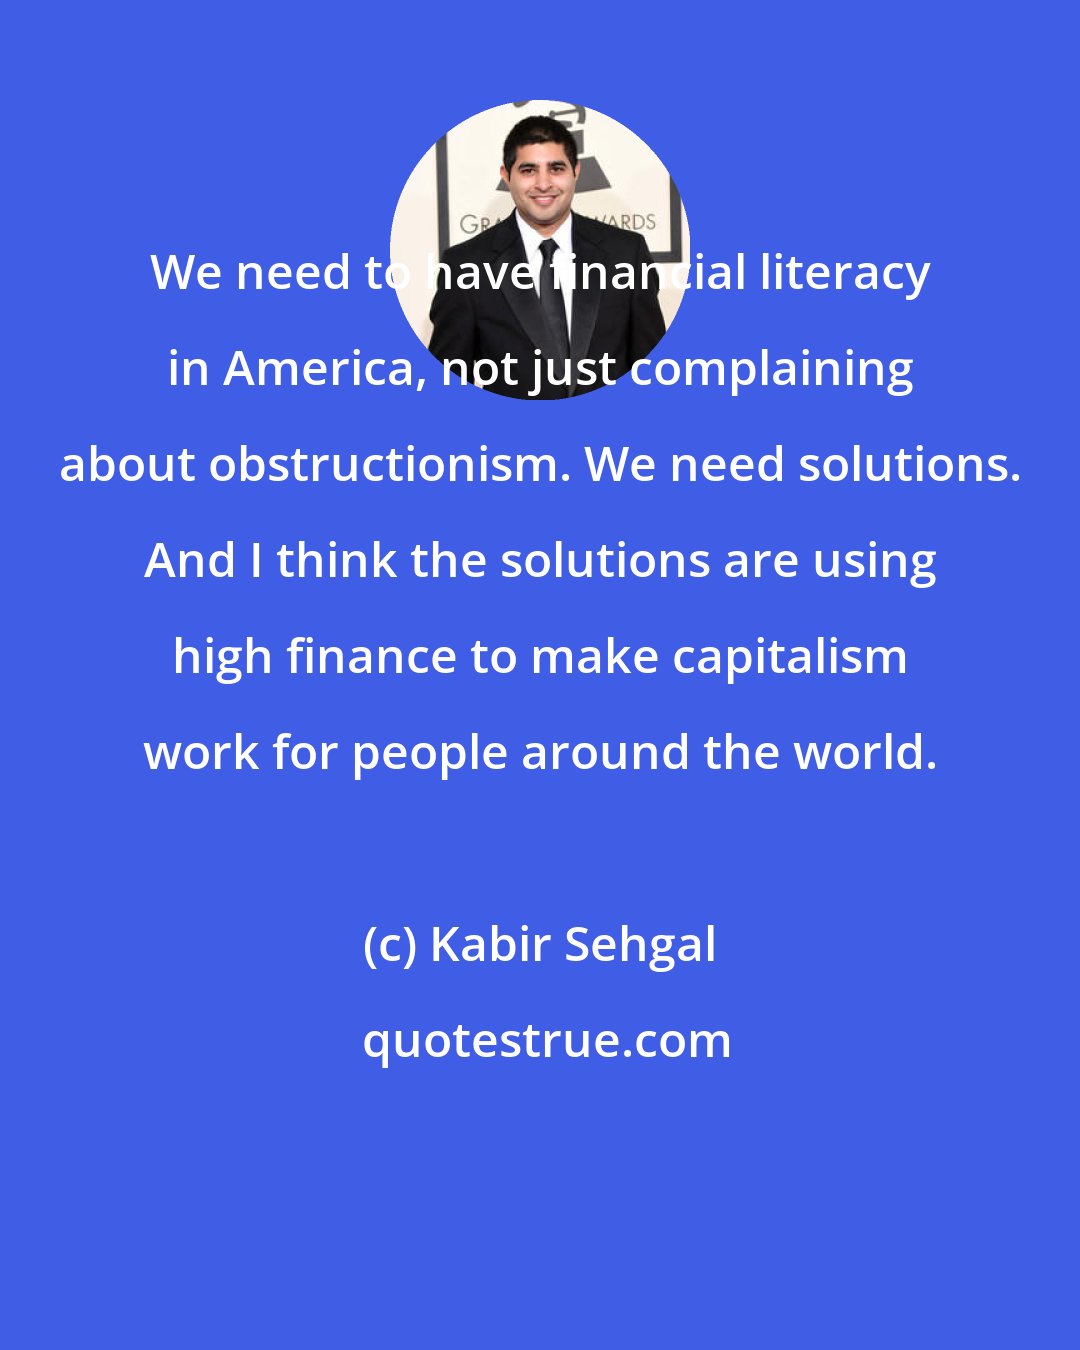 Kabir Sehgal: We need to have financial literacy in America, not just complaining about obstructionism. We need solutions. And I think the solutions are using high finance to make capitalism work for people around the world.